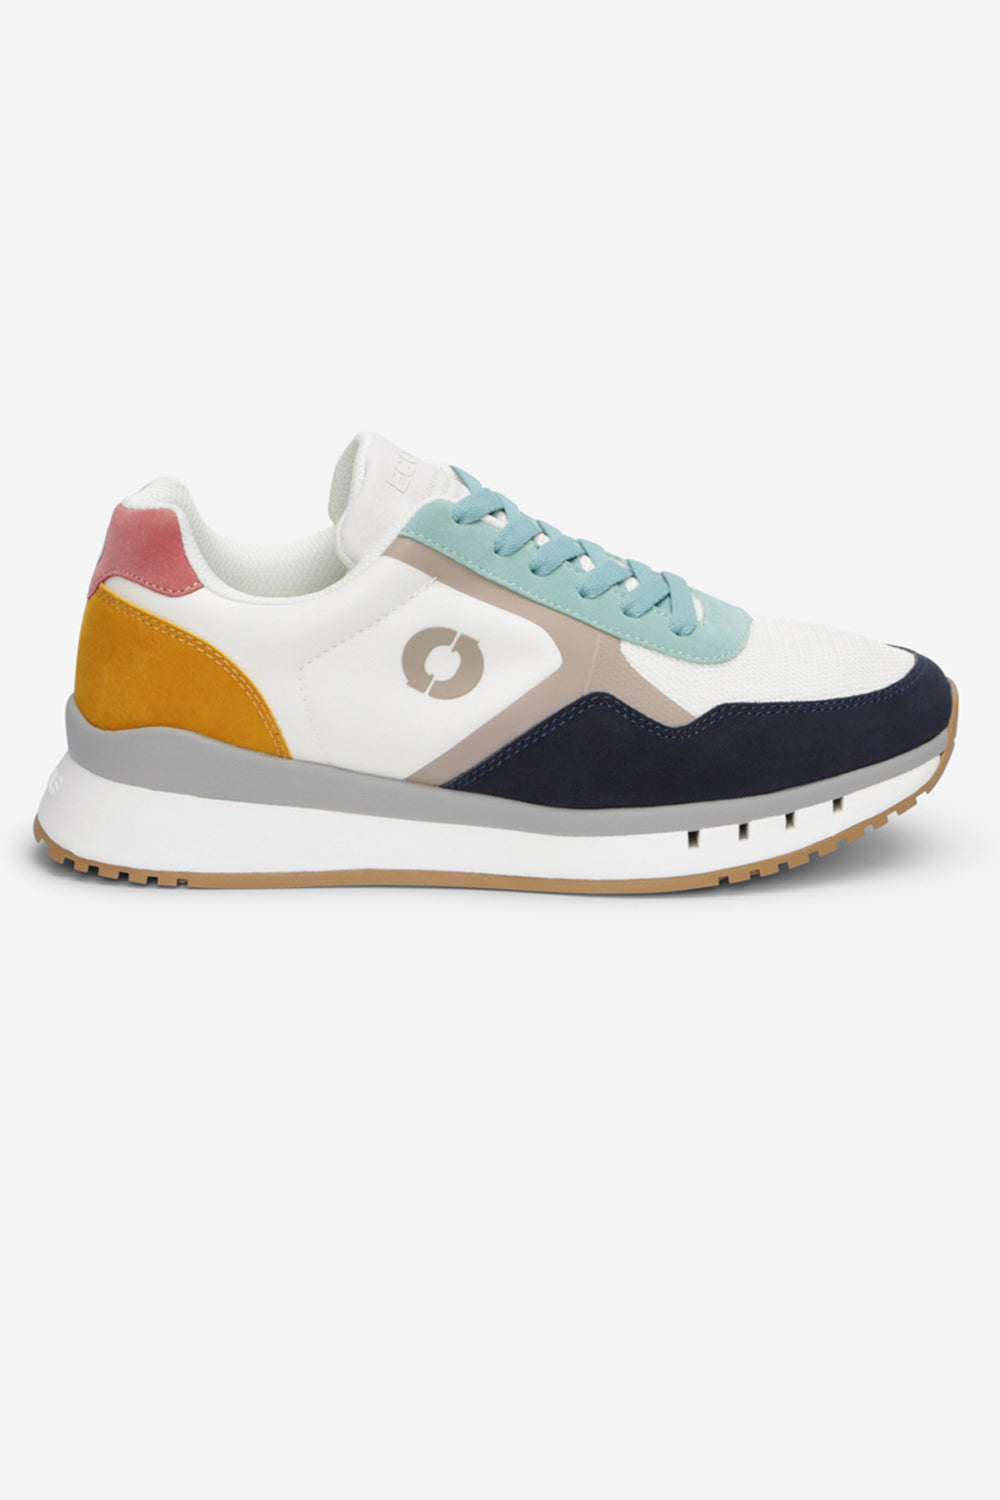 OFF WHITE / NAVY CERVINO TRAINERS